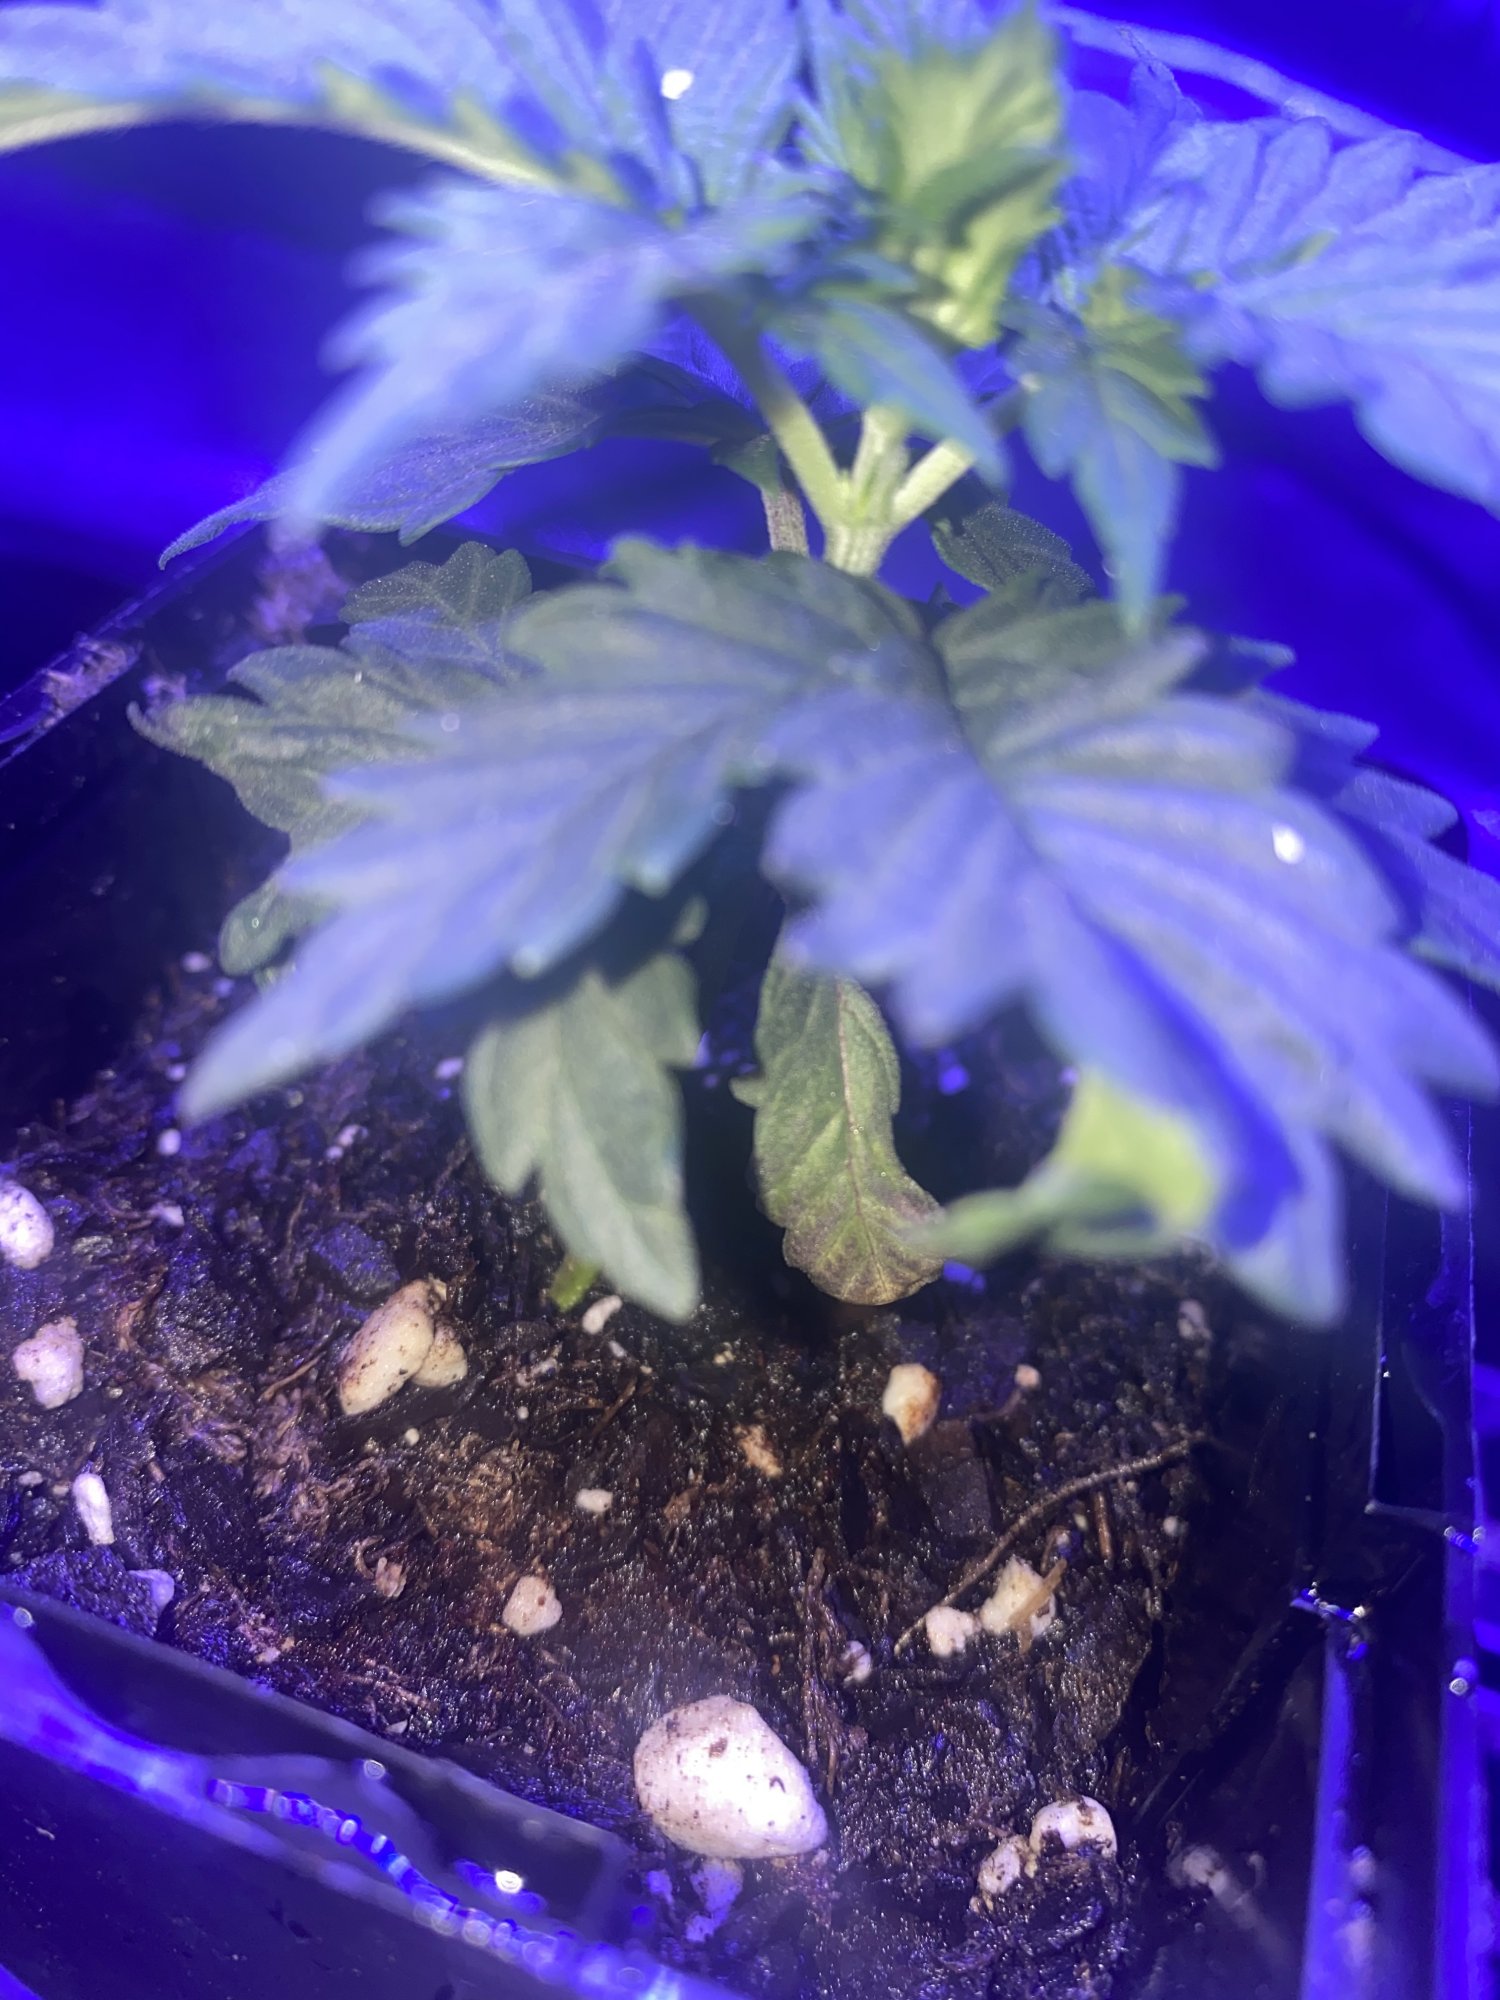 First time growing yellow spots on one plant 2